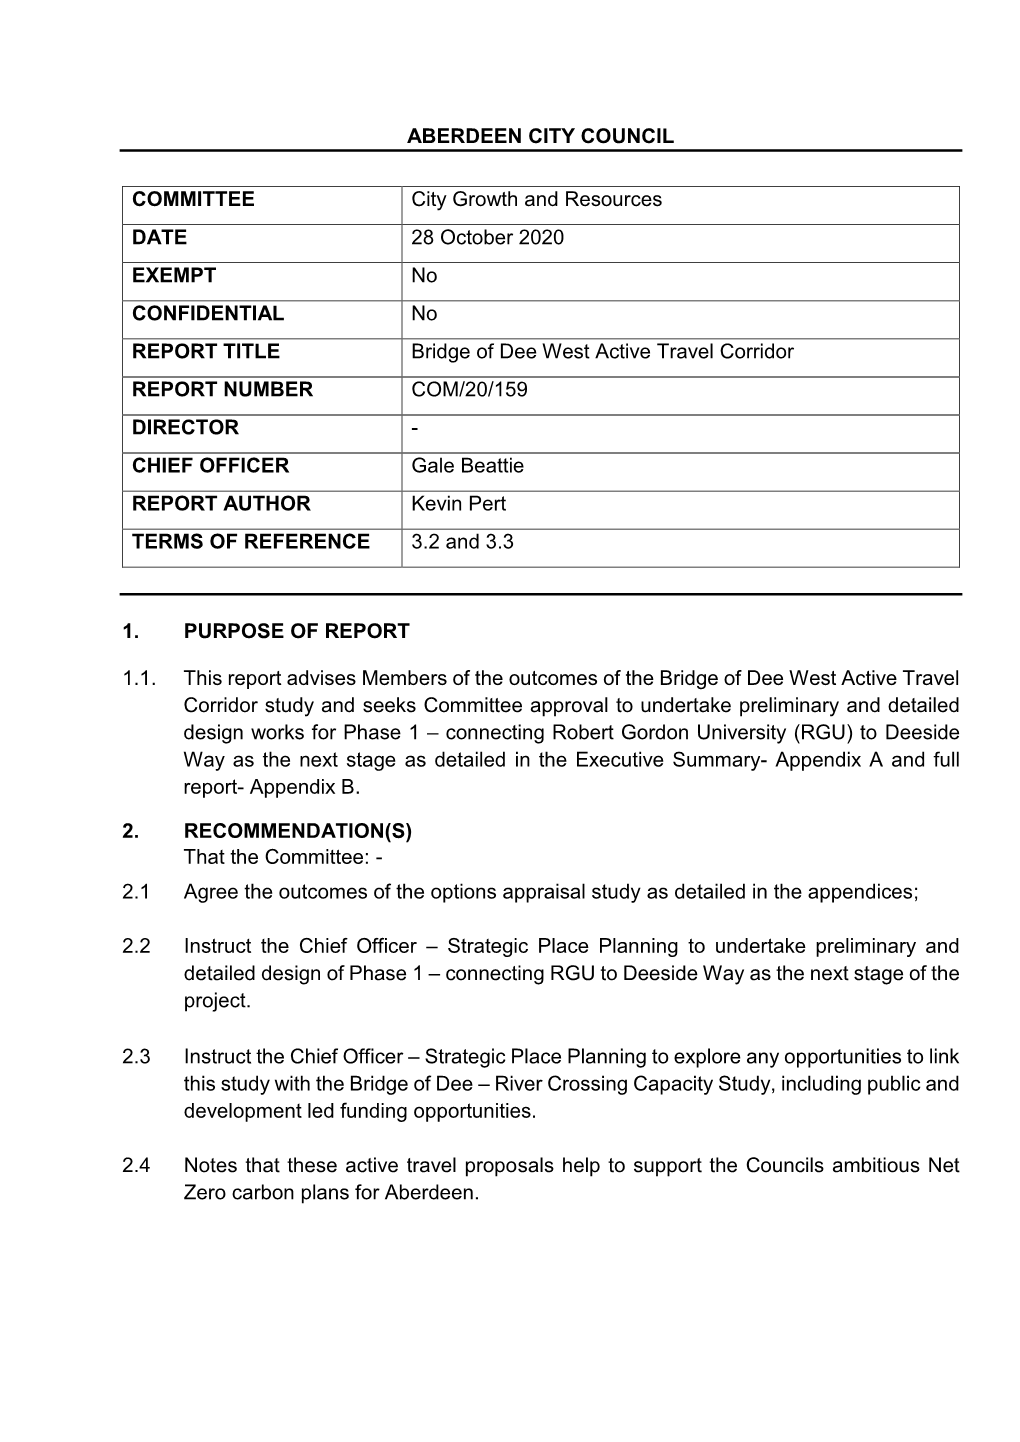 Bridge of Dee West Active Travel Corridor REPORT NUMBER COM/20/159 DIRECTOR - CHIEF OFFICER Gale Beattie REPORT AUTHOR Kevin Pert TERMS of REFERENCE 3.2 and 3.3